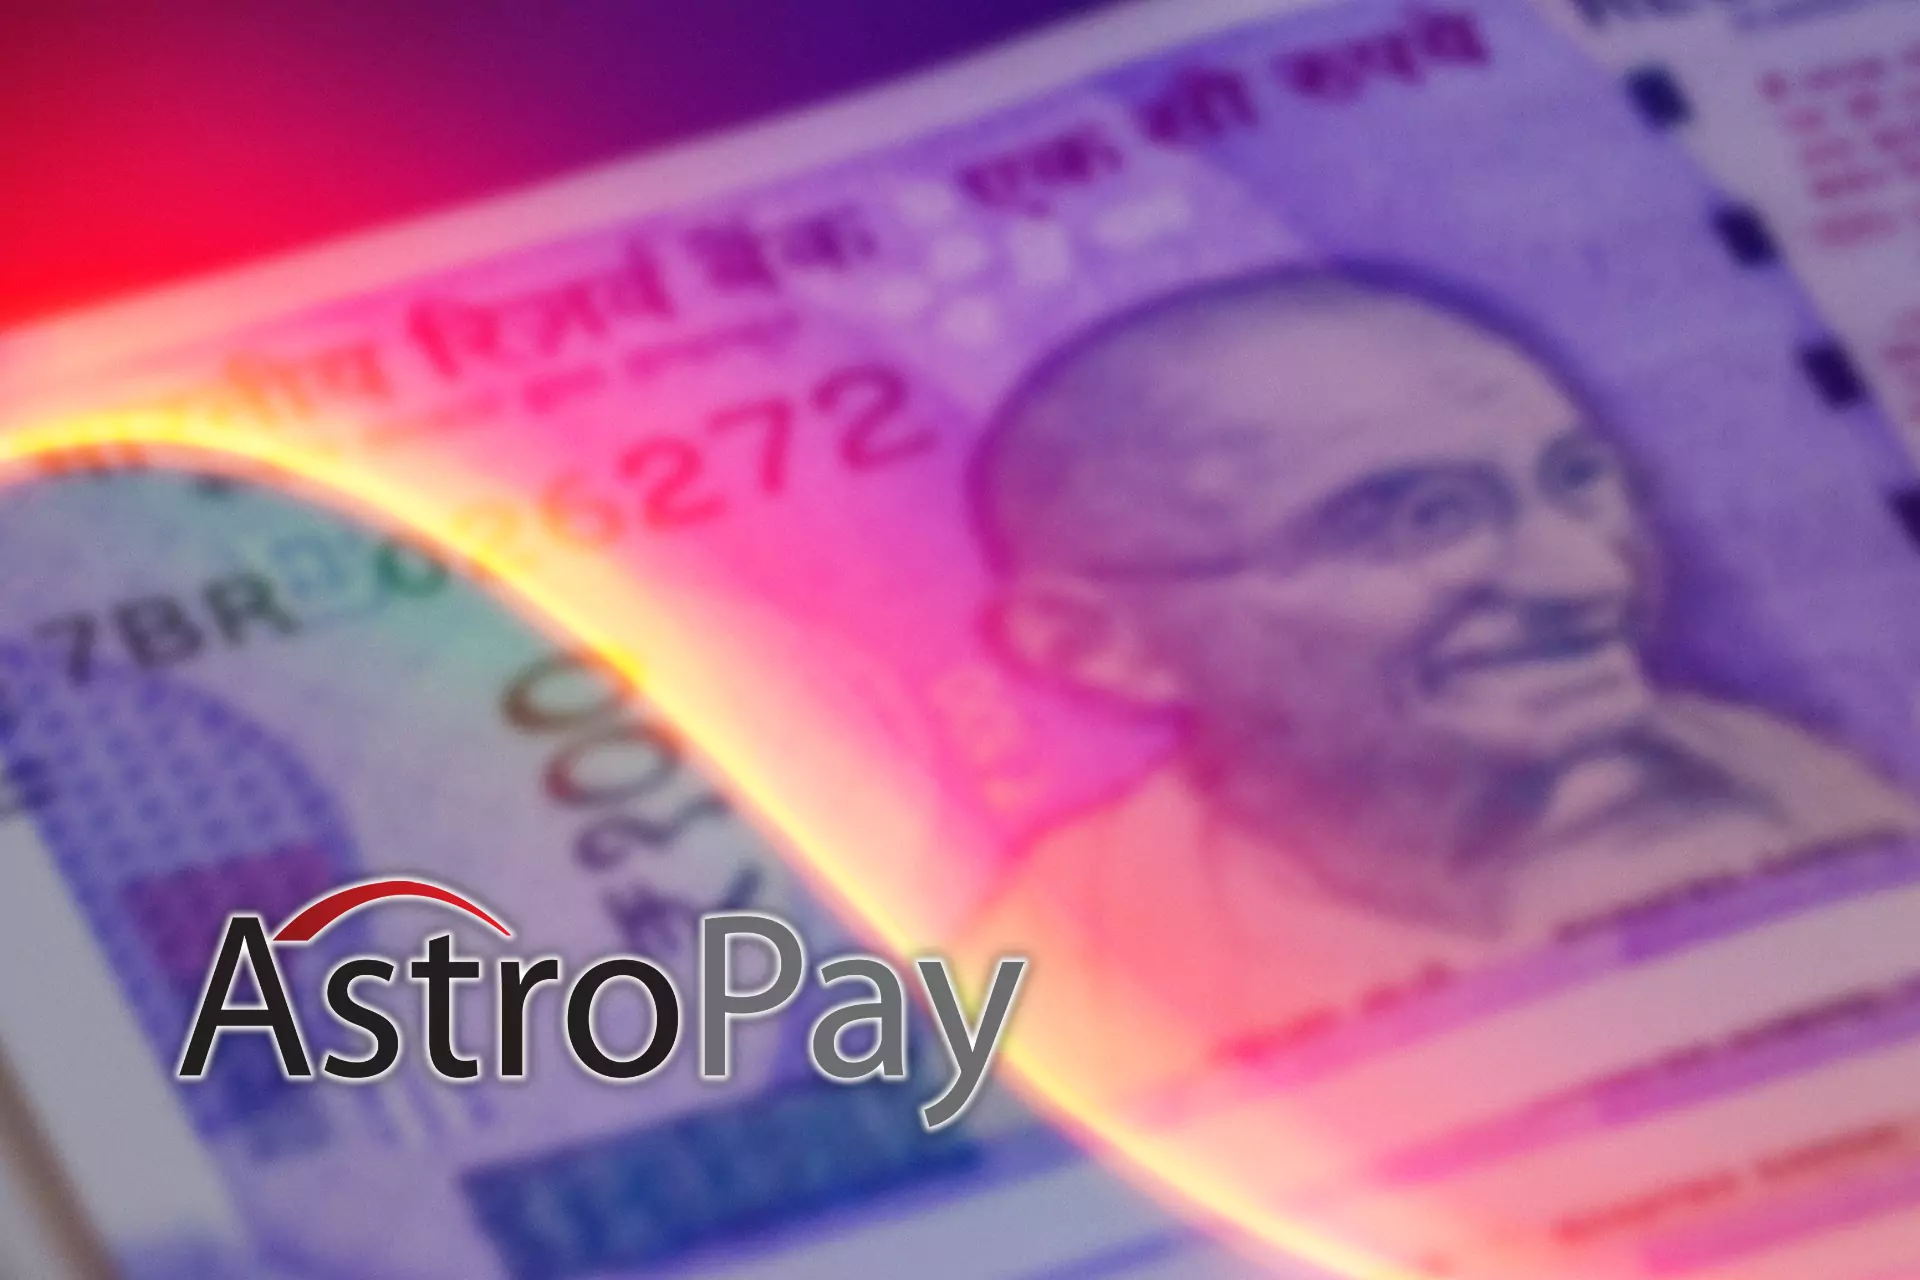 Using Astropay you can make deposits and withdraw funds from the casino sites' accounts.